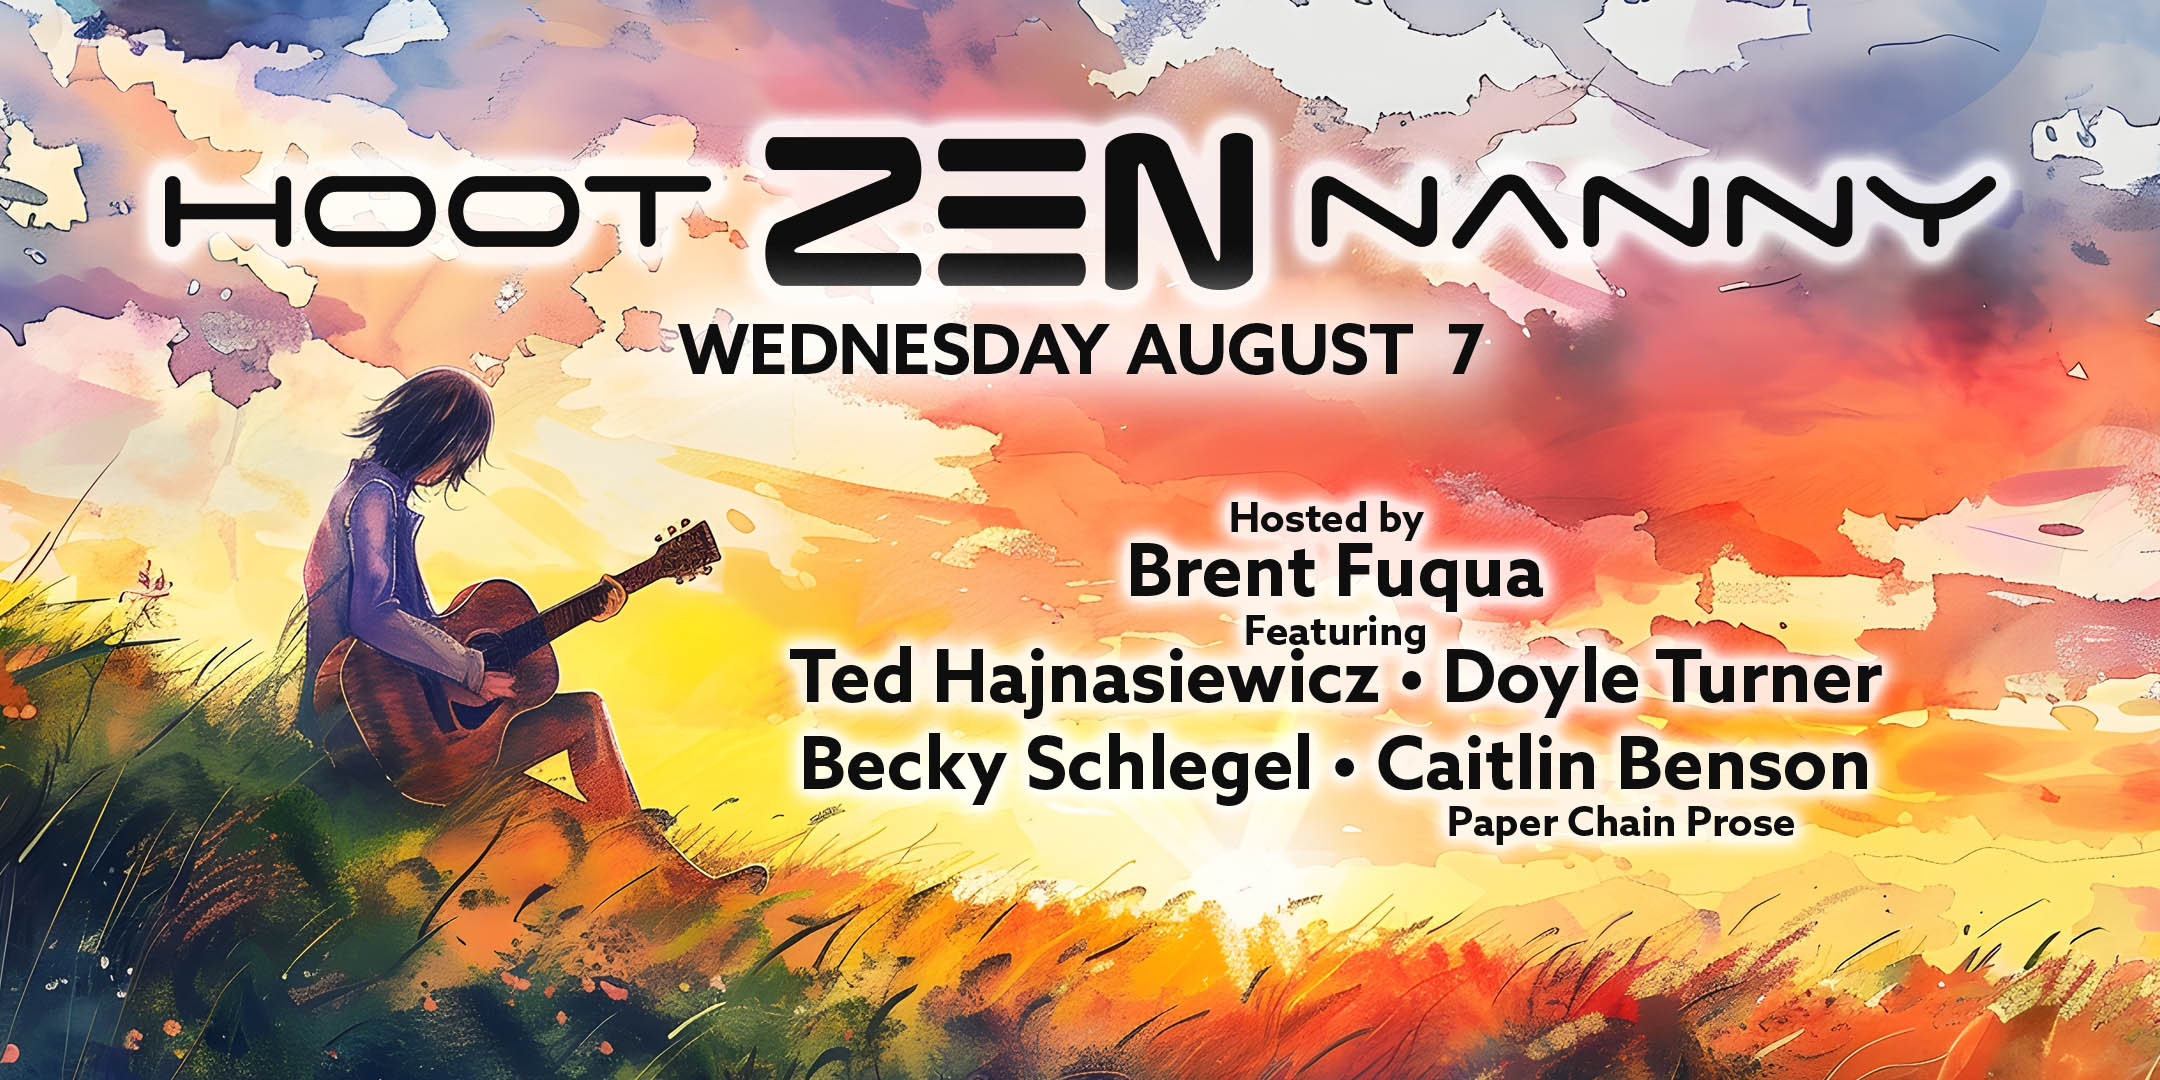 Hoot-Zen-Nanny (Every 1st Wednesday) Showcasing 4 artists in an intimate setting. Hosted by Brent Fuqua This months featured Artists: Ted Hajnasiewicz Doyle Turner Becky Schlegel Caitlin Benson (Paper Chain Prose)